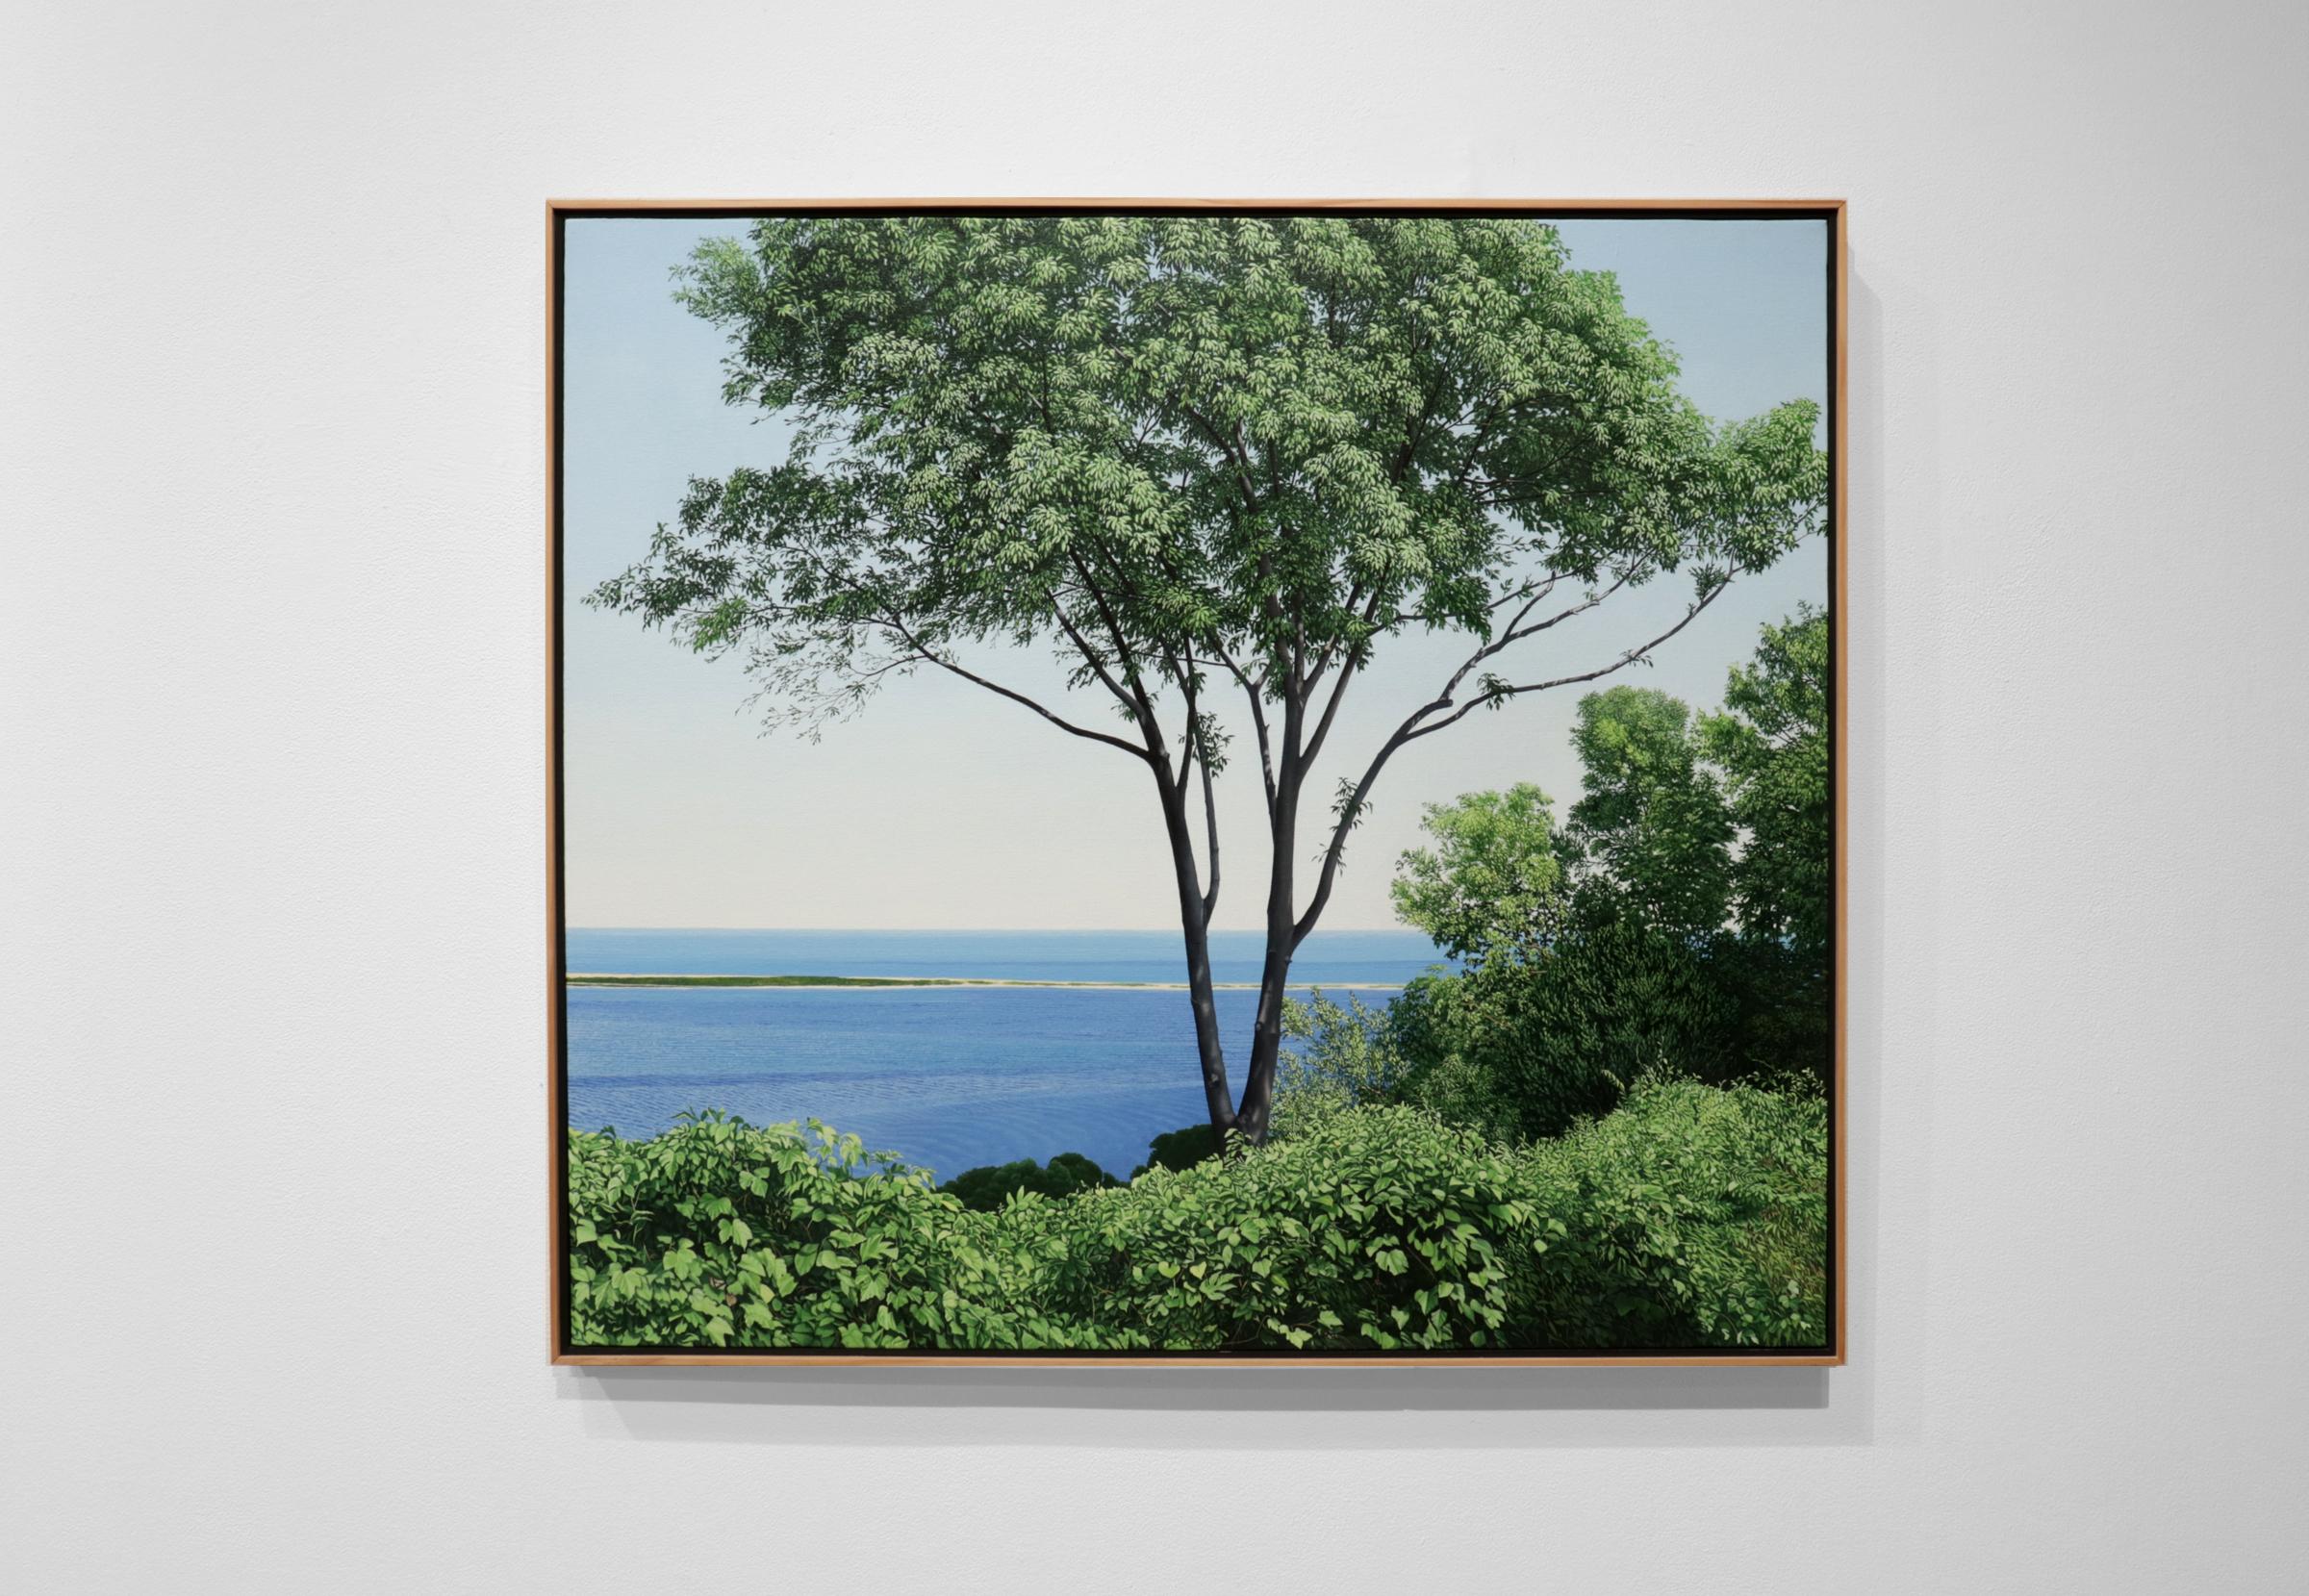 SANDY HOOK - Contemporary Landscape / Beach Scene / Photorealism - Painting by Anita Mazzucca